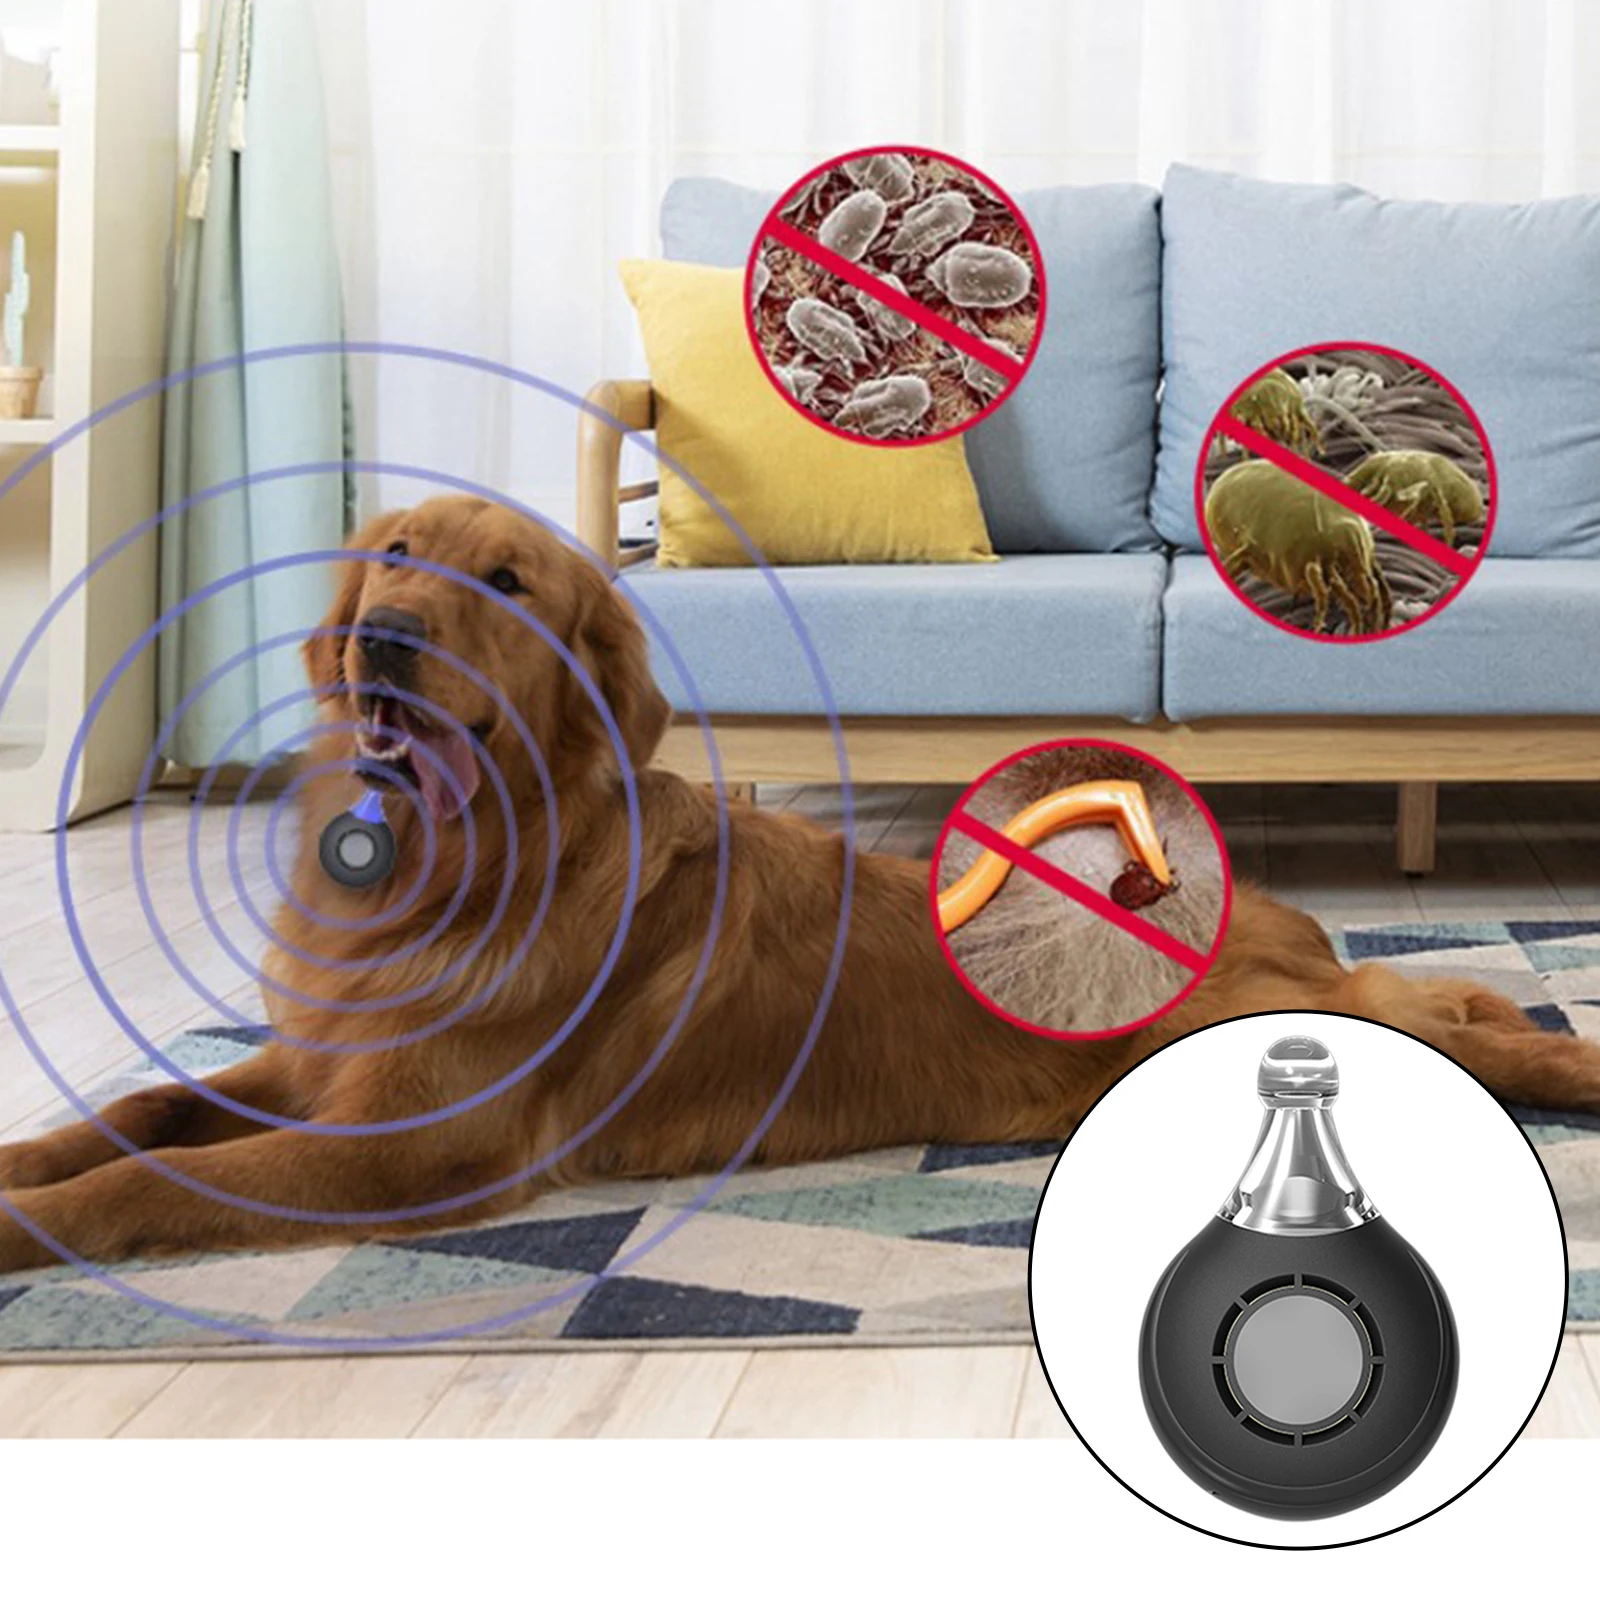 Ultrasonic Pest Repeller for Pets, USB Rechargeable Mosquito Repellent Fleas, Ticks, Louse Defender for Small Large Dogs Cats